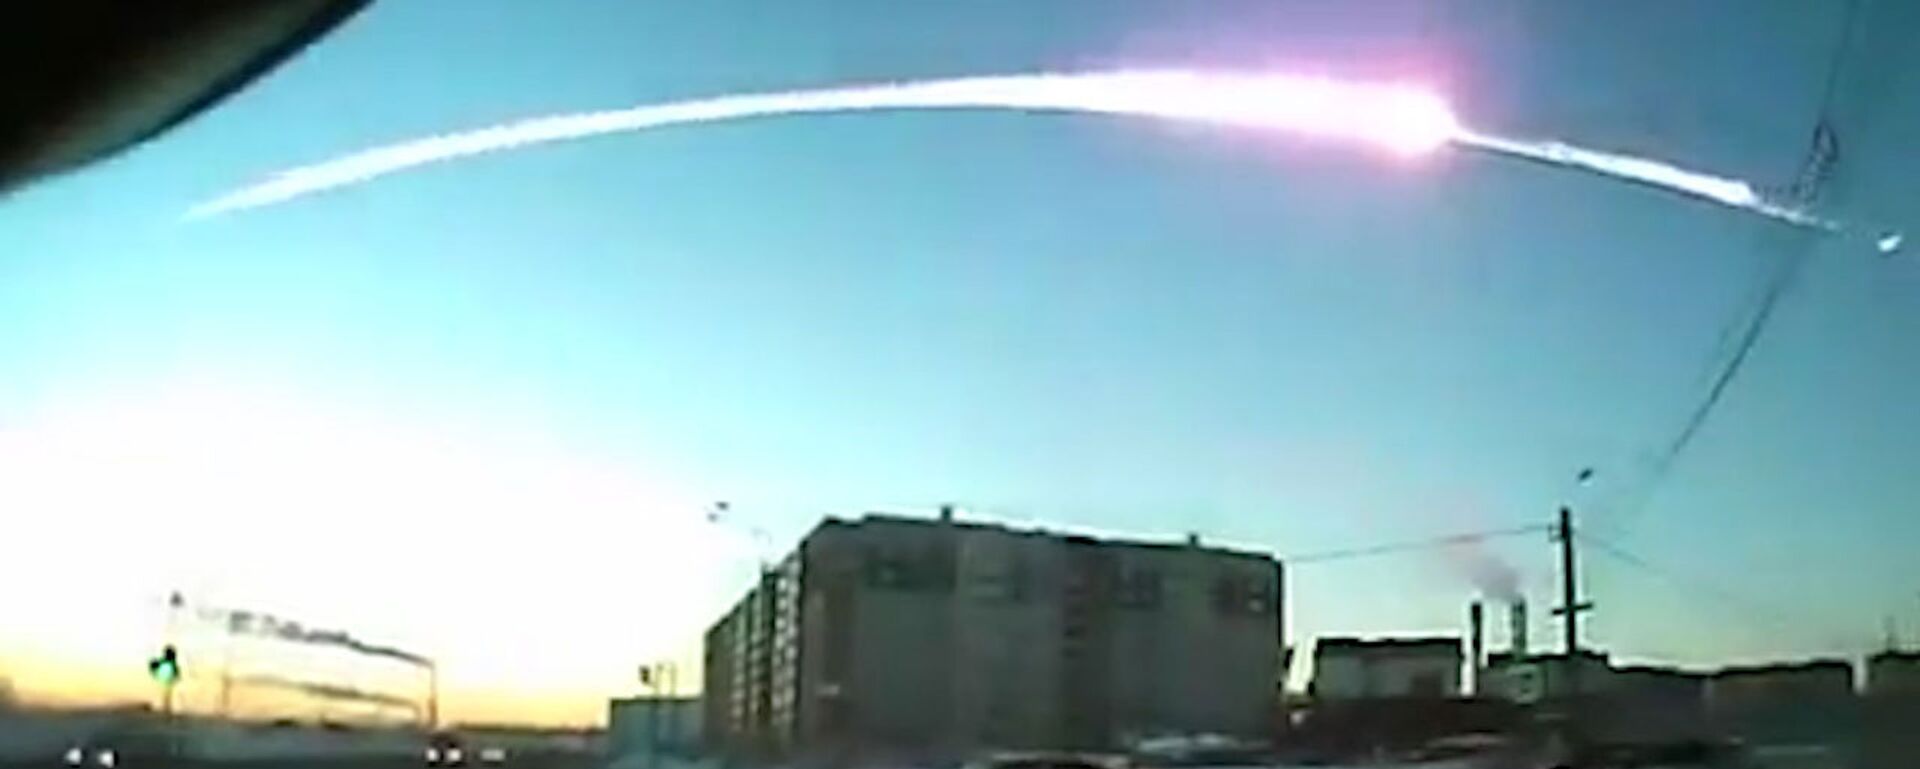 The trace of a flying object in the sky over Chelyabinsk (still from a dashboard camera). (File) - Sputnik International, 1920, 25.02.2022